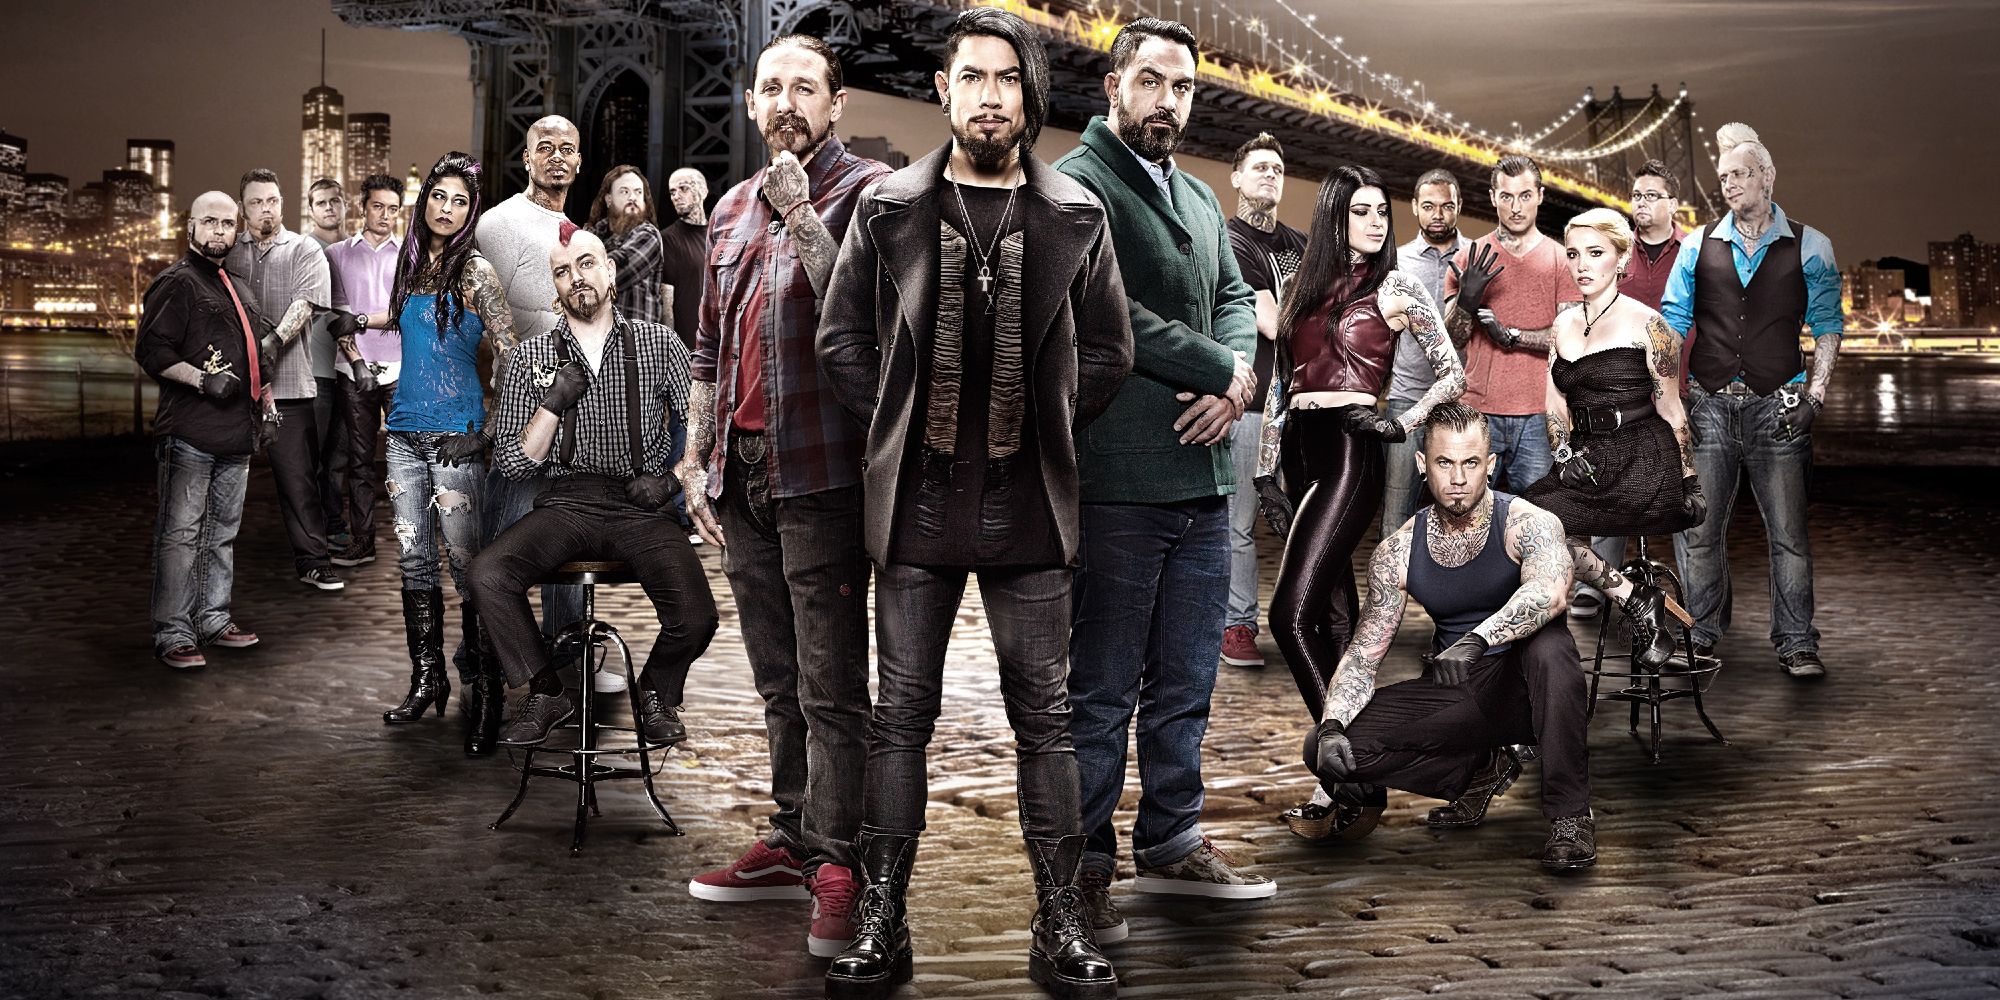 The cast of Ink Master season 4 pose in a group in front of the Brooklyn Bridge.